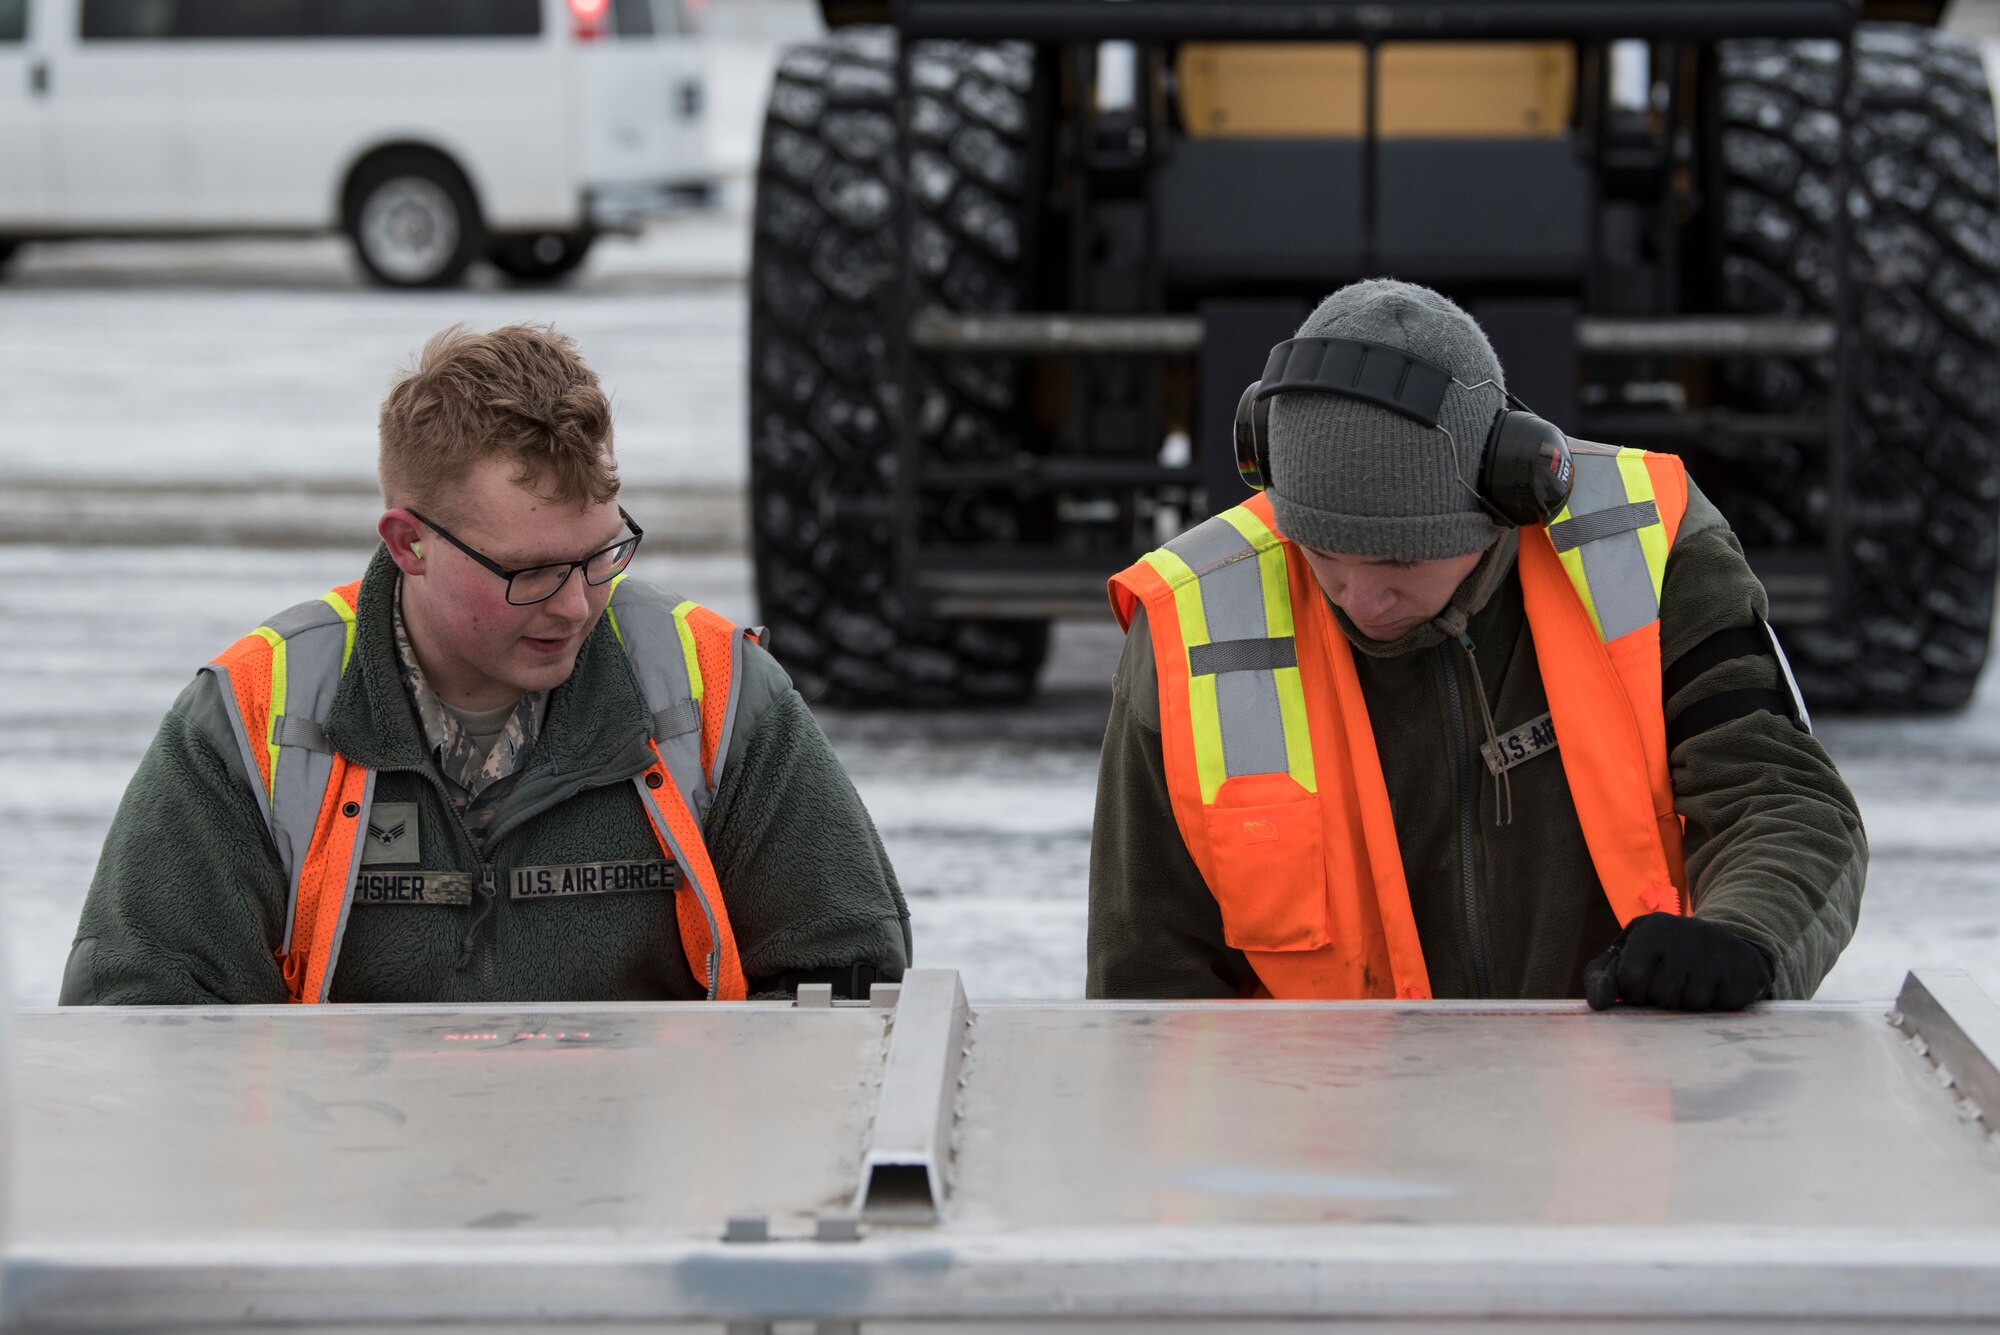 U.S. Air Force Airmen with the 732nd Aircraft Mobility Squadron secure cargo onto a pallet at Joint Base Elmendorf-Richardson, Alaska, Dec. 1, 2018. JBER mission operations continue following a 7.0 earthquake hit to Anchorage, Alaska, on Nov. 30.